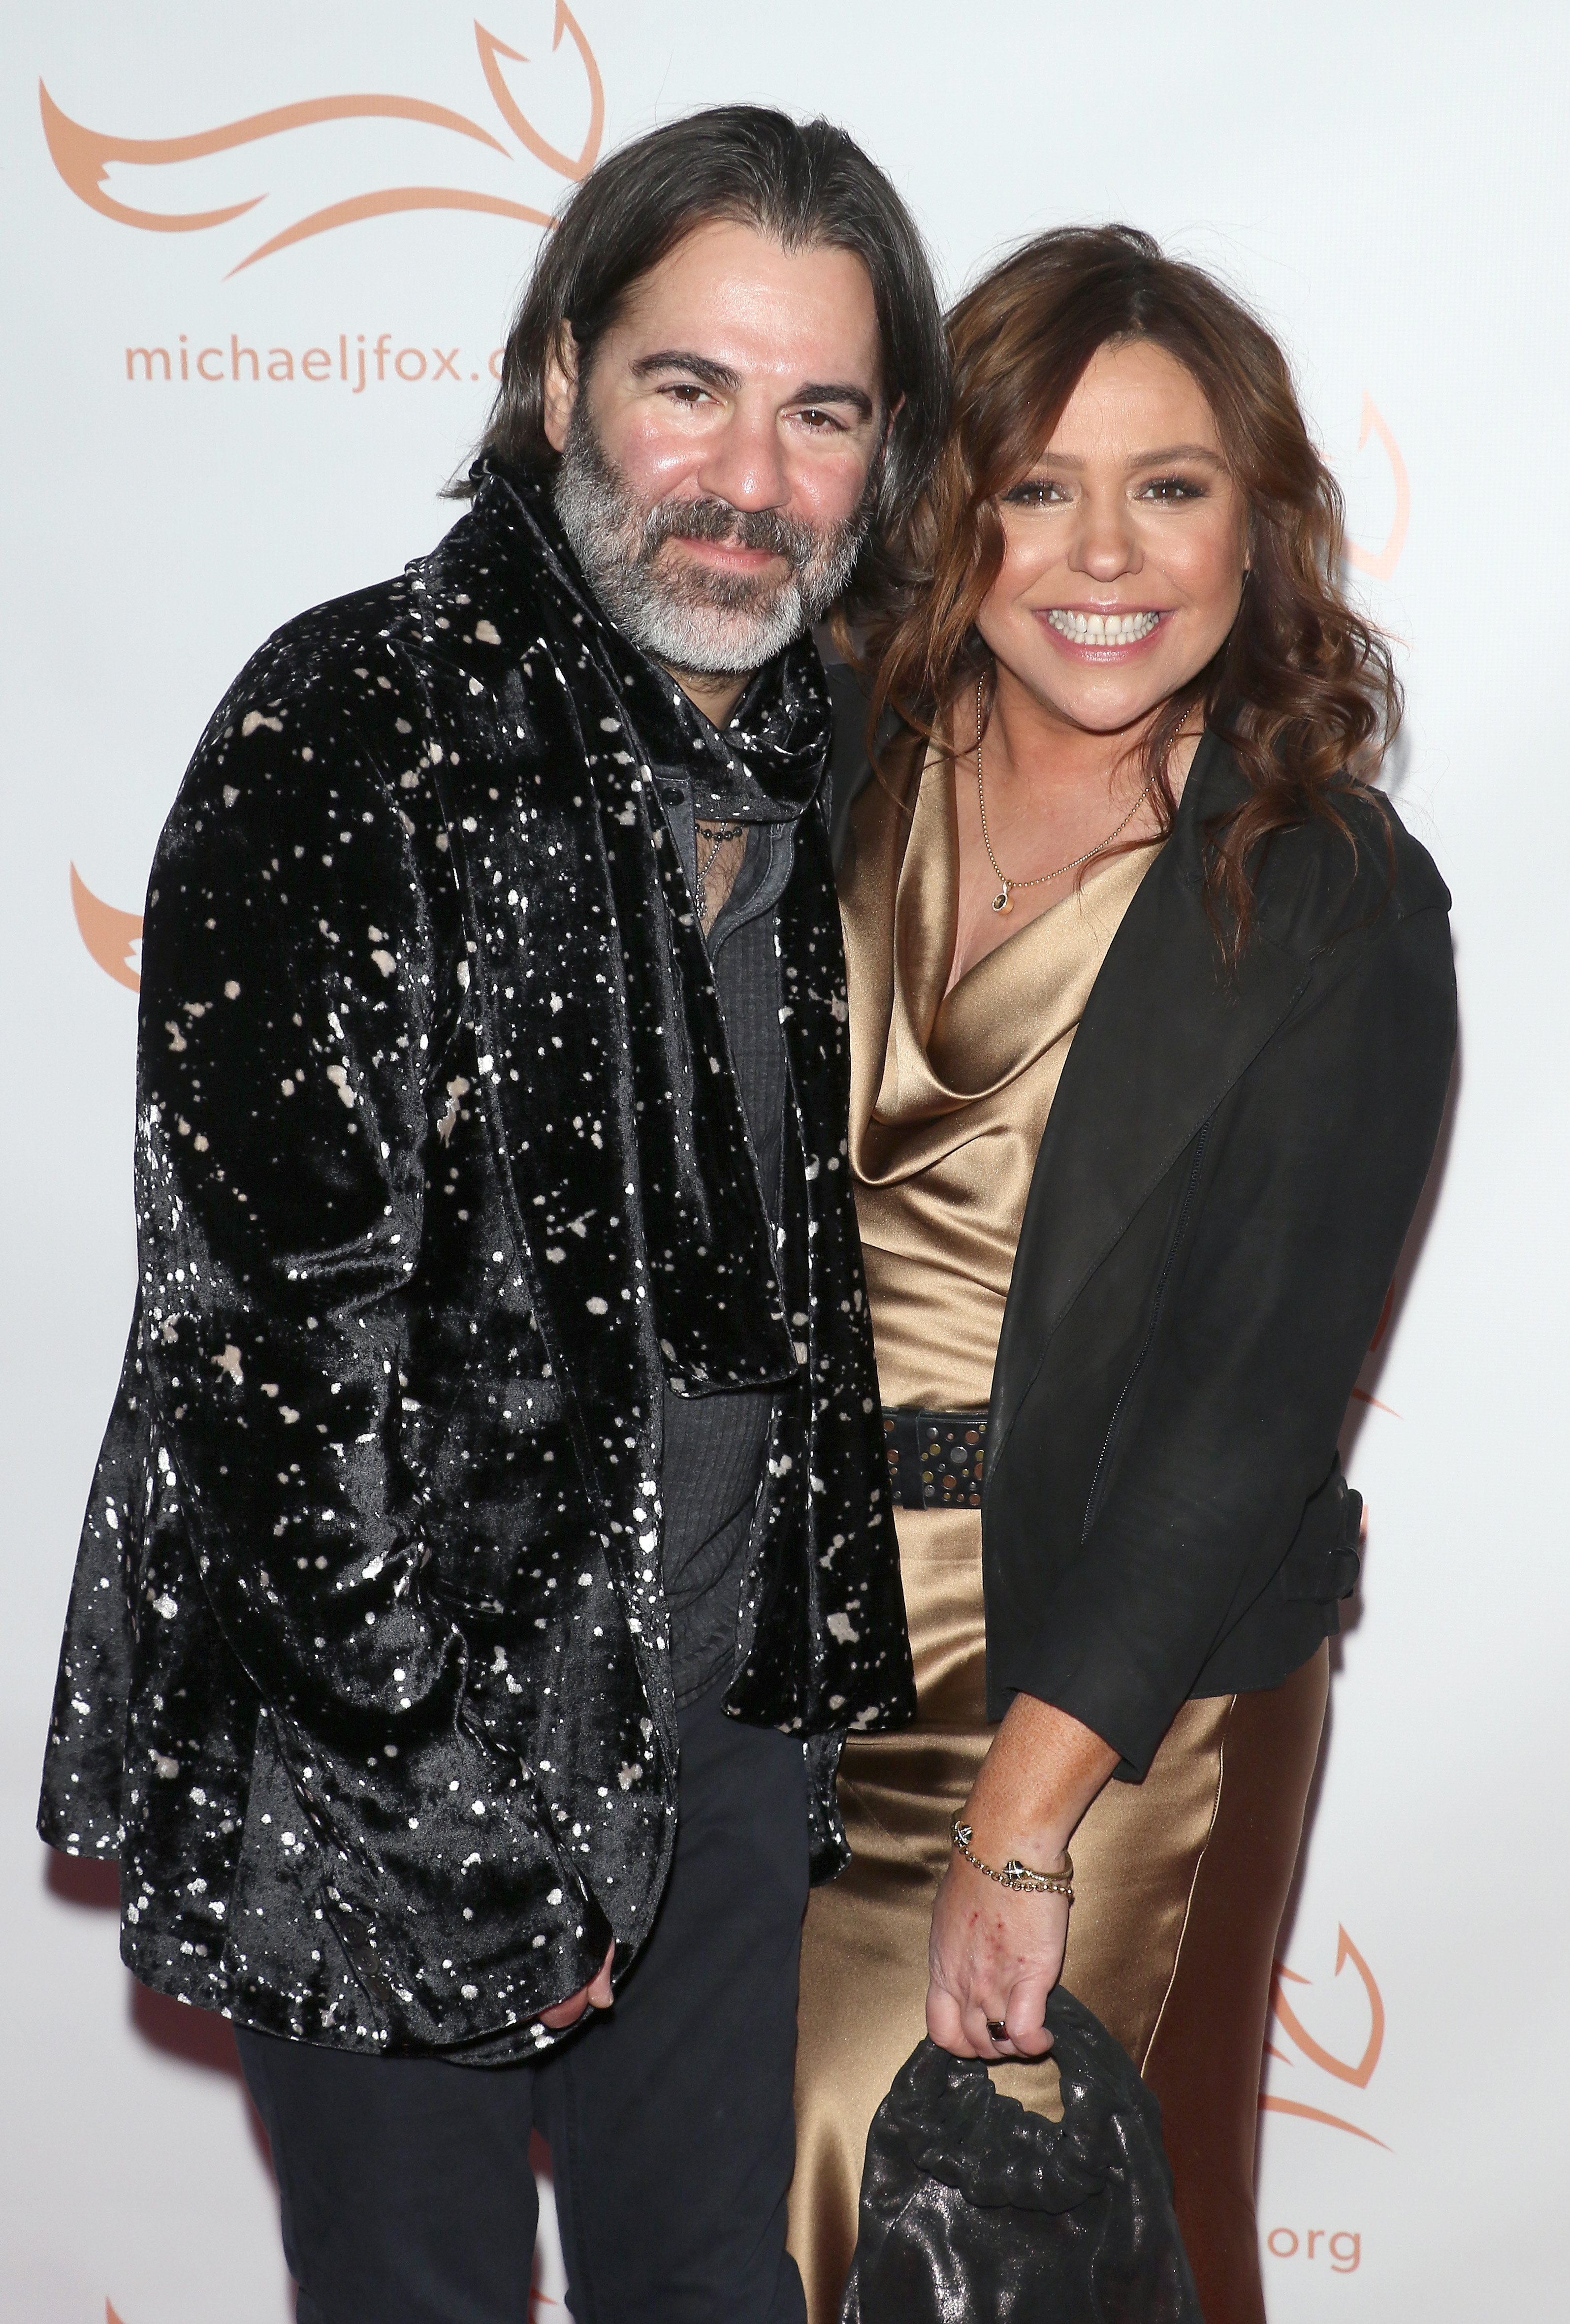 John M. Cusimano and Rachael Ray at A Funny Thing Happened On The Way To Cure Parkinson's benefitting The Michael J. Fox Foundation, hosted at The Hilton New York in New York City, NY, on November 16, 2019. | Source: Getty Images